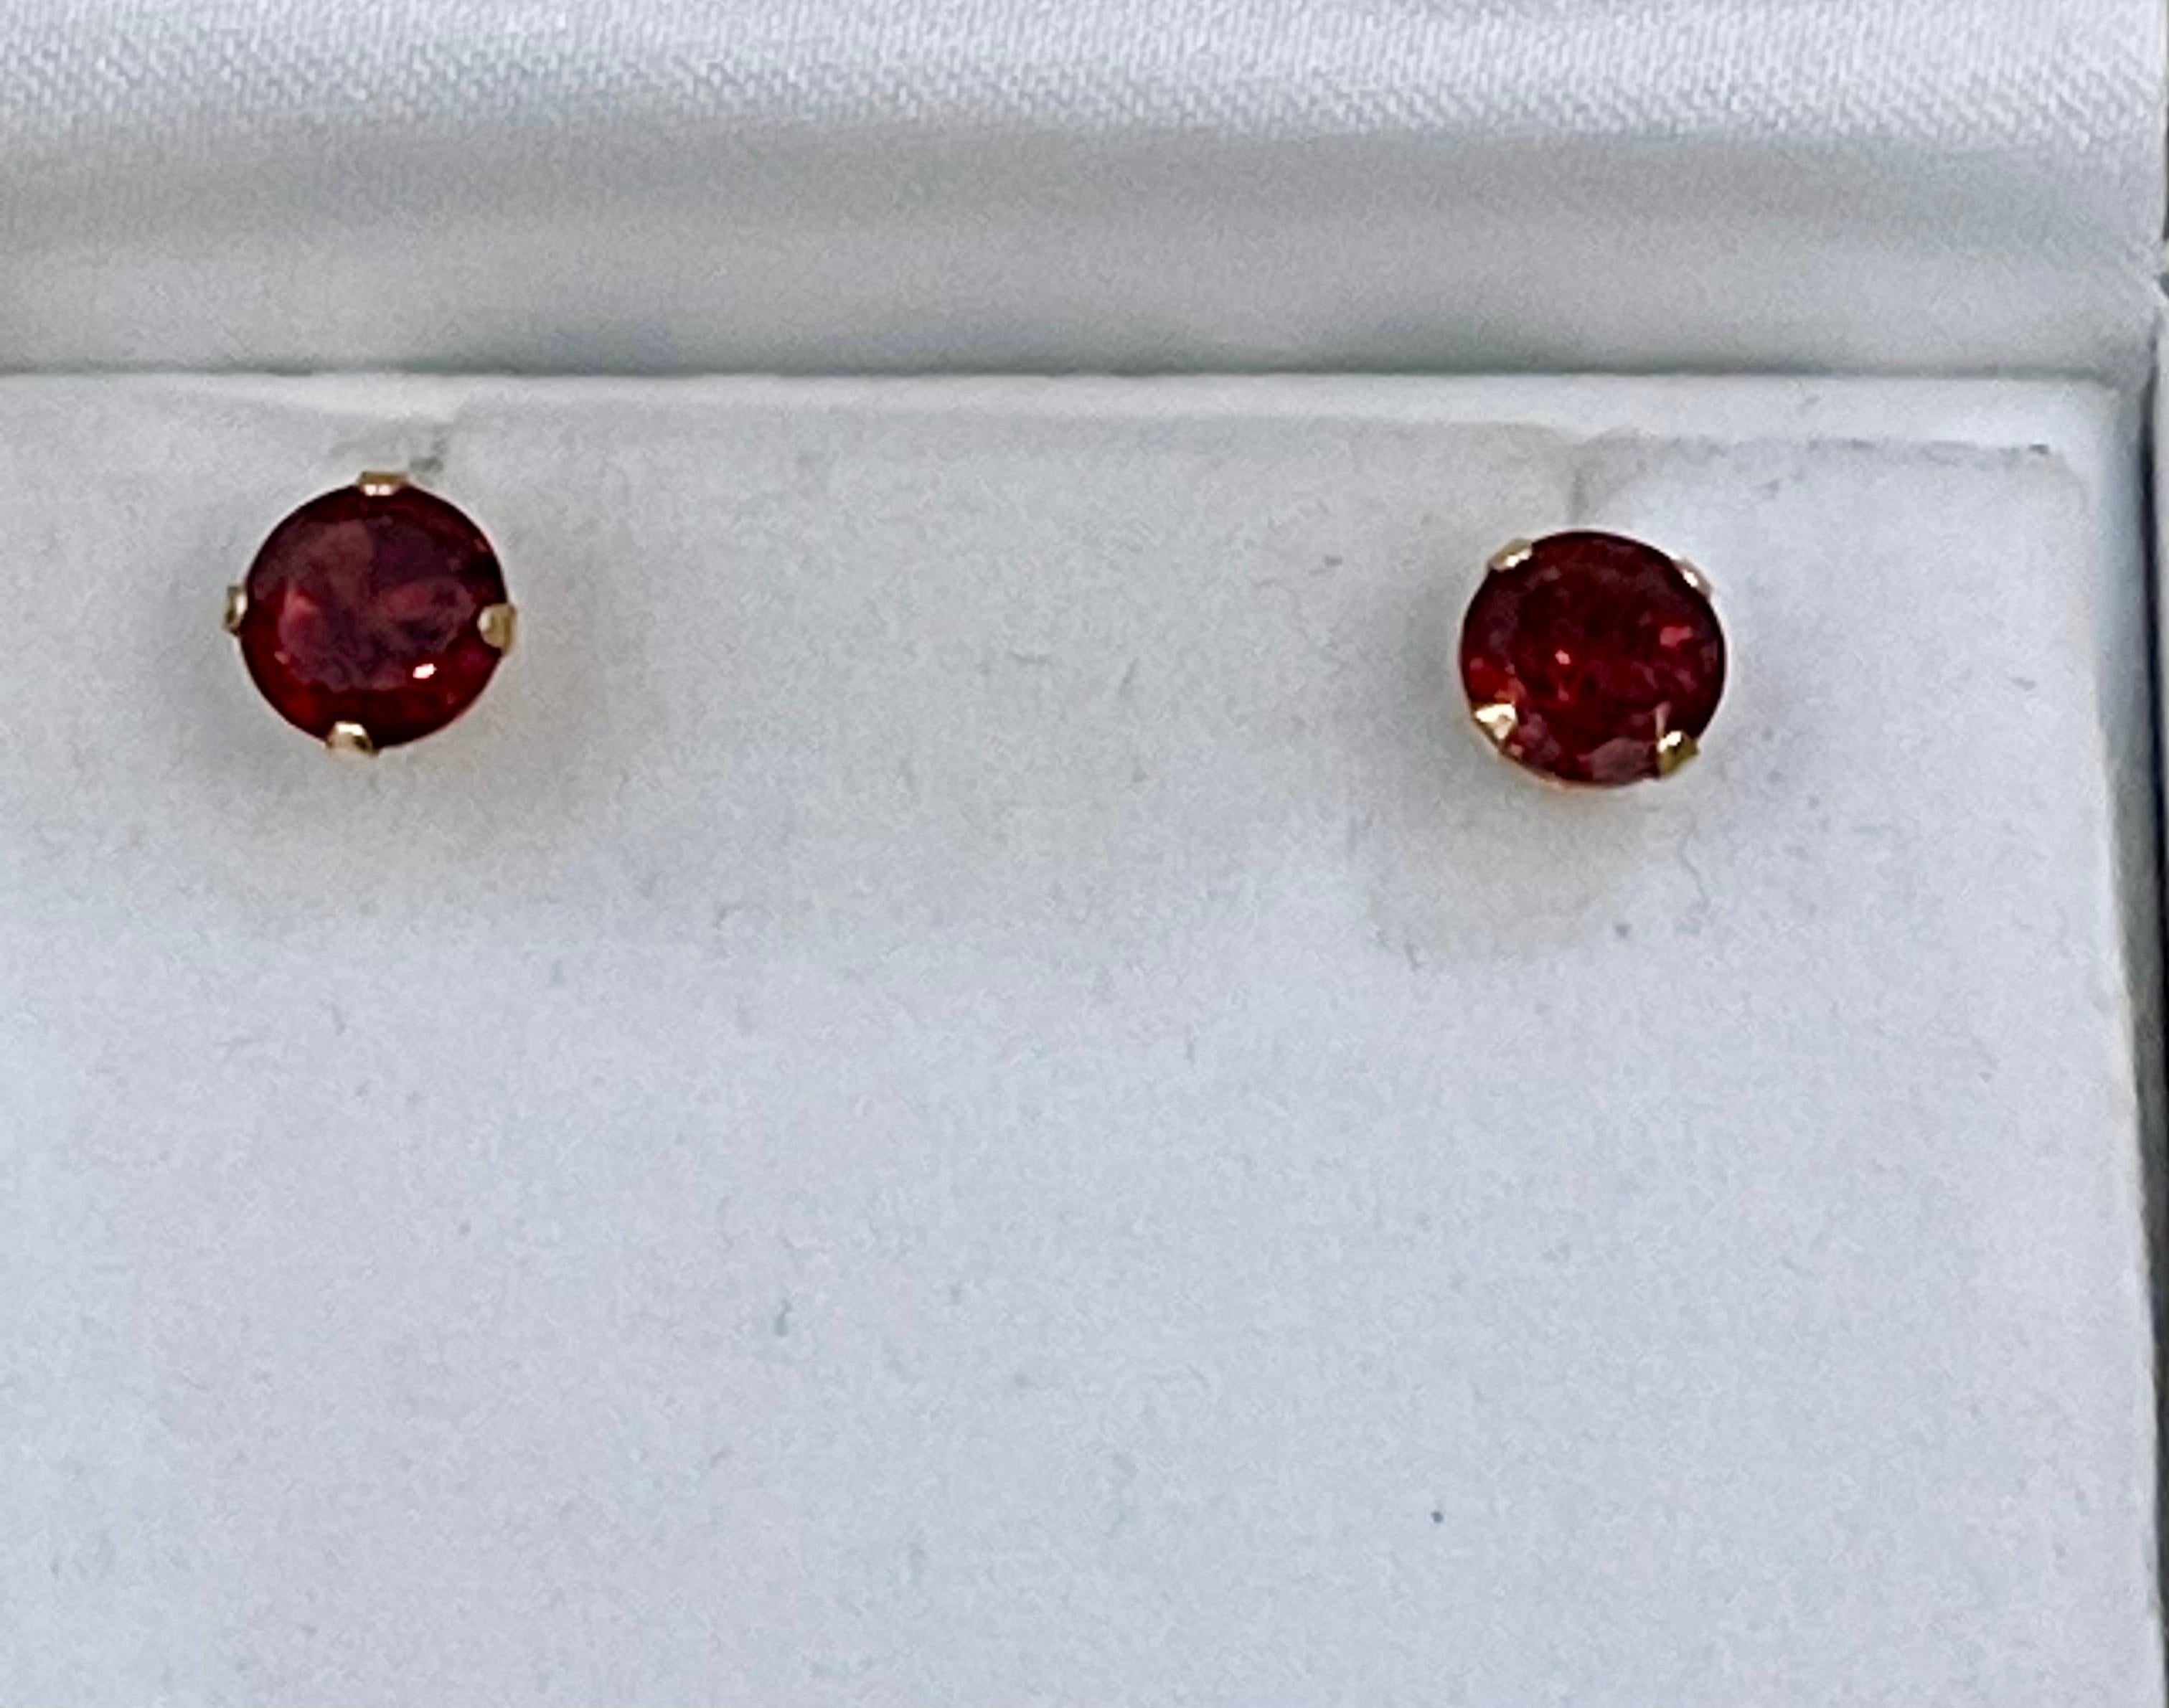 
Approximately 3.0 Carat Round Garnet Stud Post Earrings 14 Karat Yellow Gold
Each stud has a special back of yellow gold with rubber back which makes the earring sit very well on the ear lobe.
6.3 MM Round
Makes a good gift 
This exquisite pair of